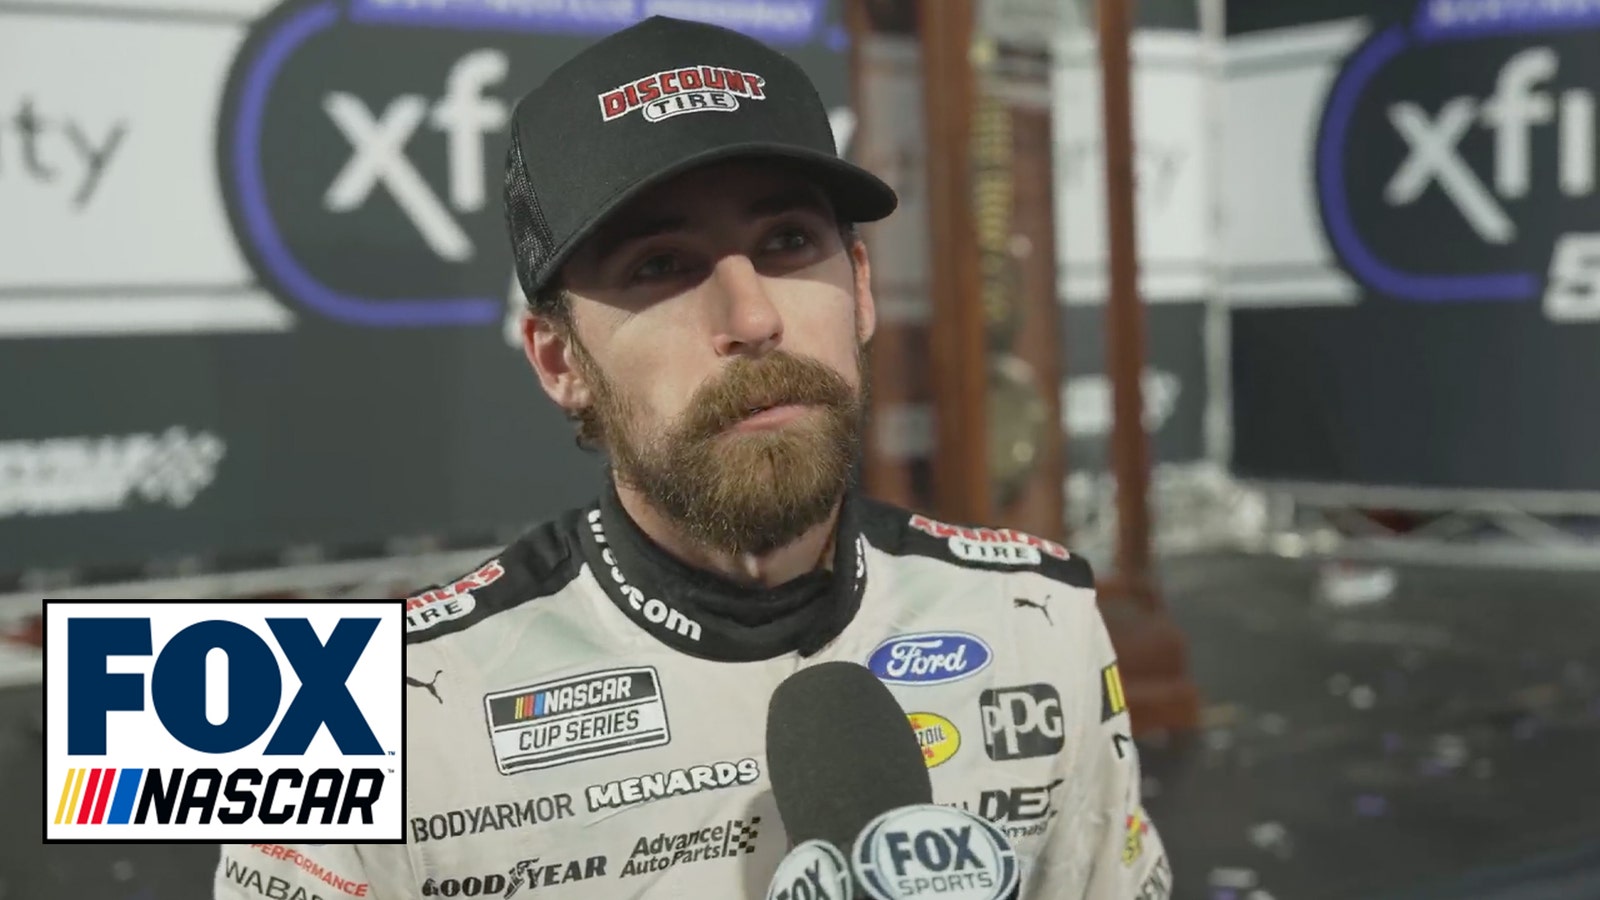 Ryan Blaney discusses whether or not he is the championship favorite